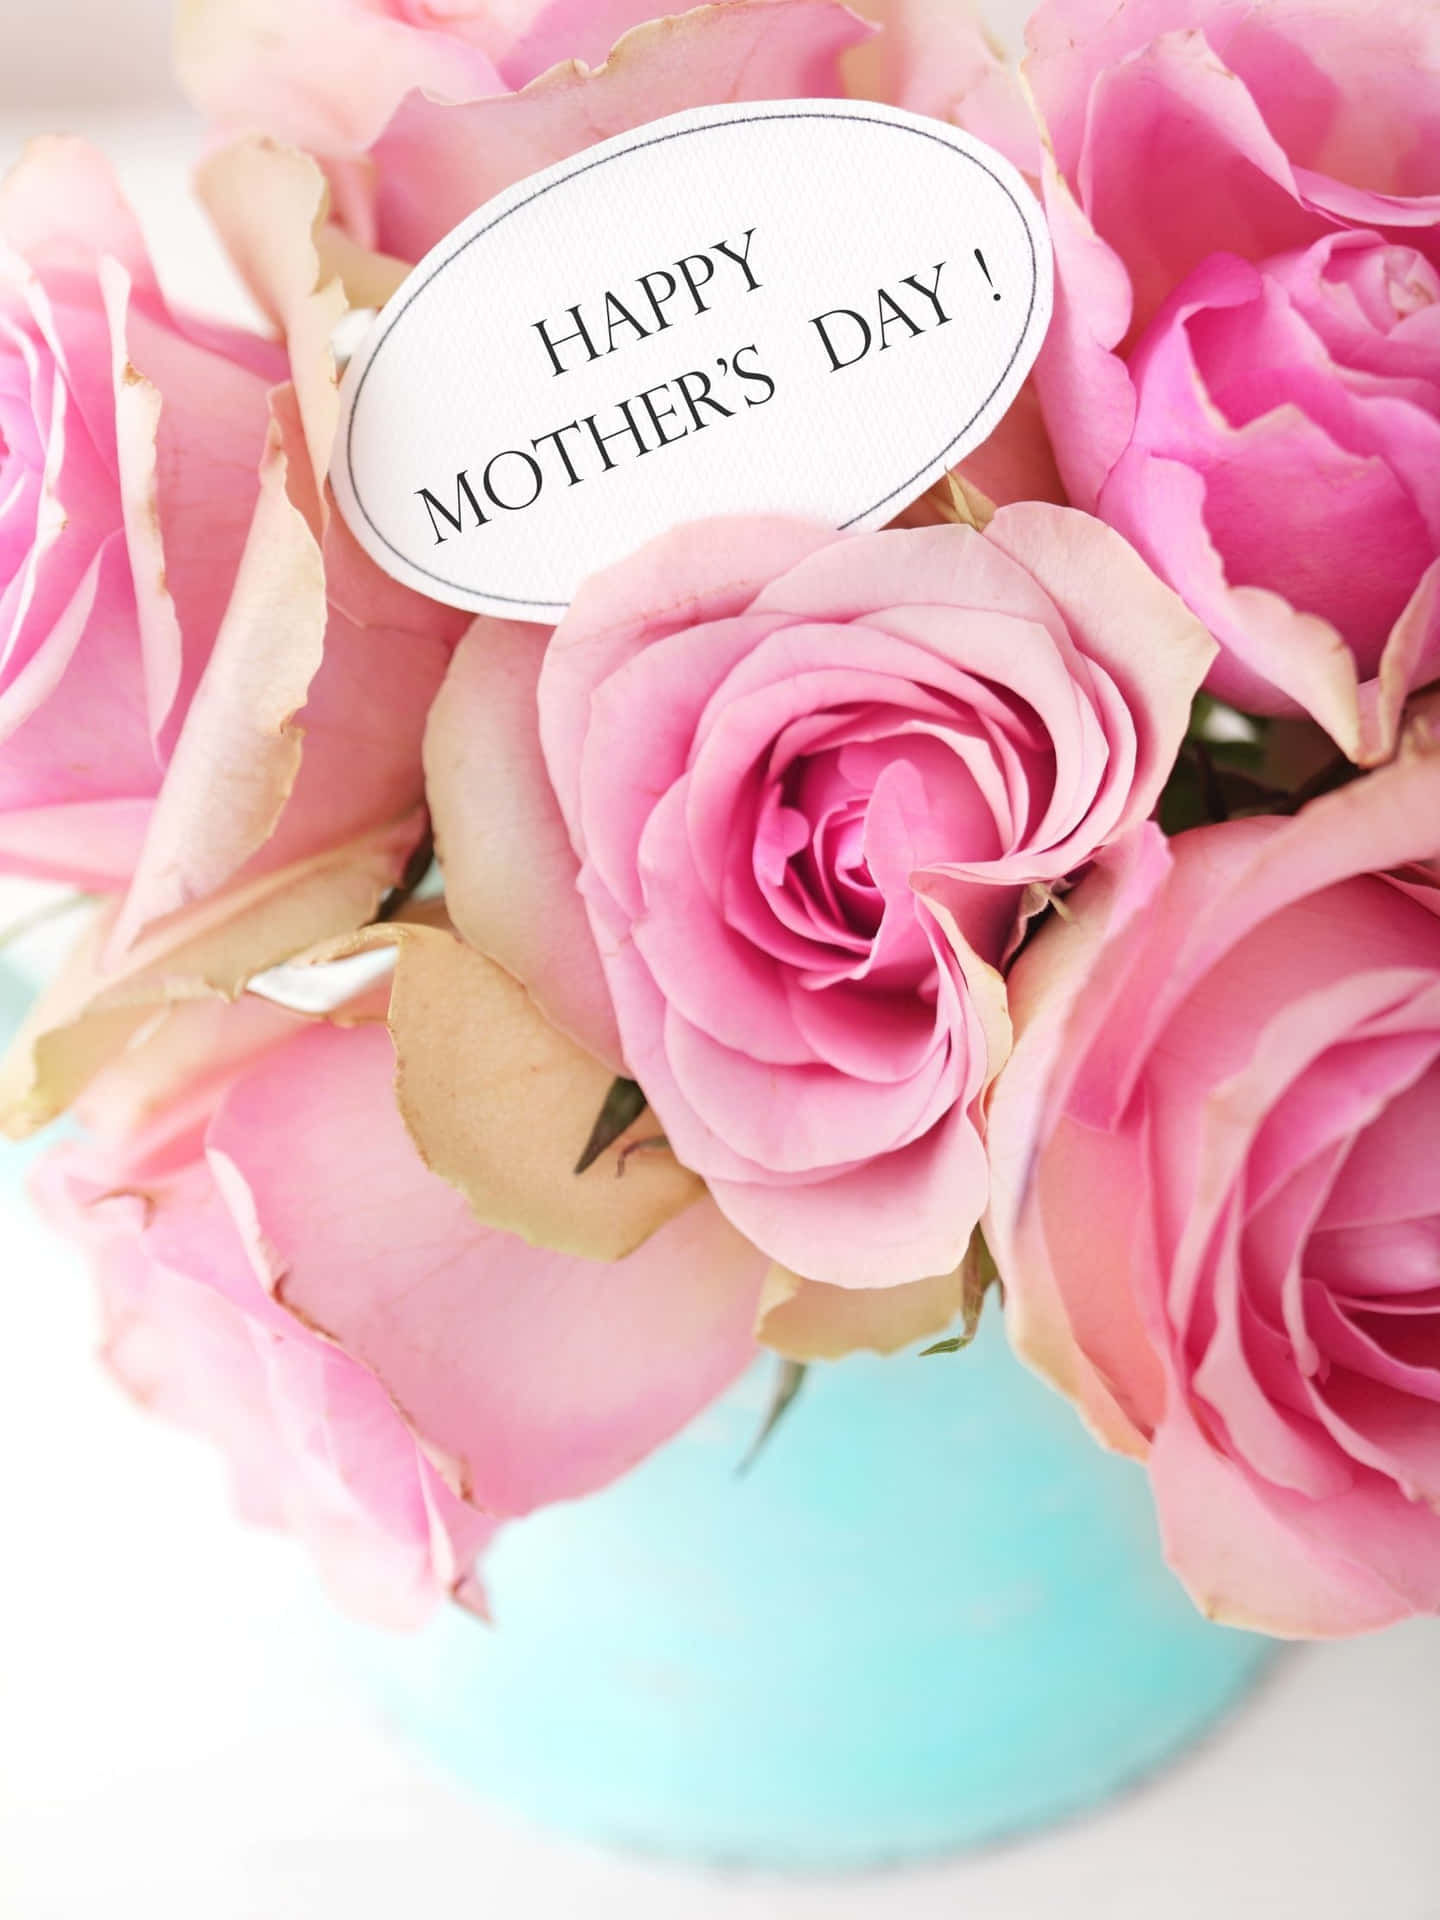 Happy Mothers Day Images Wallpaper